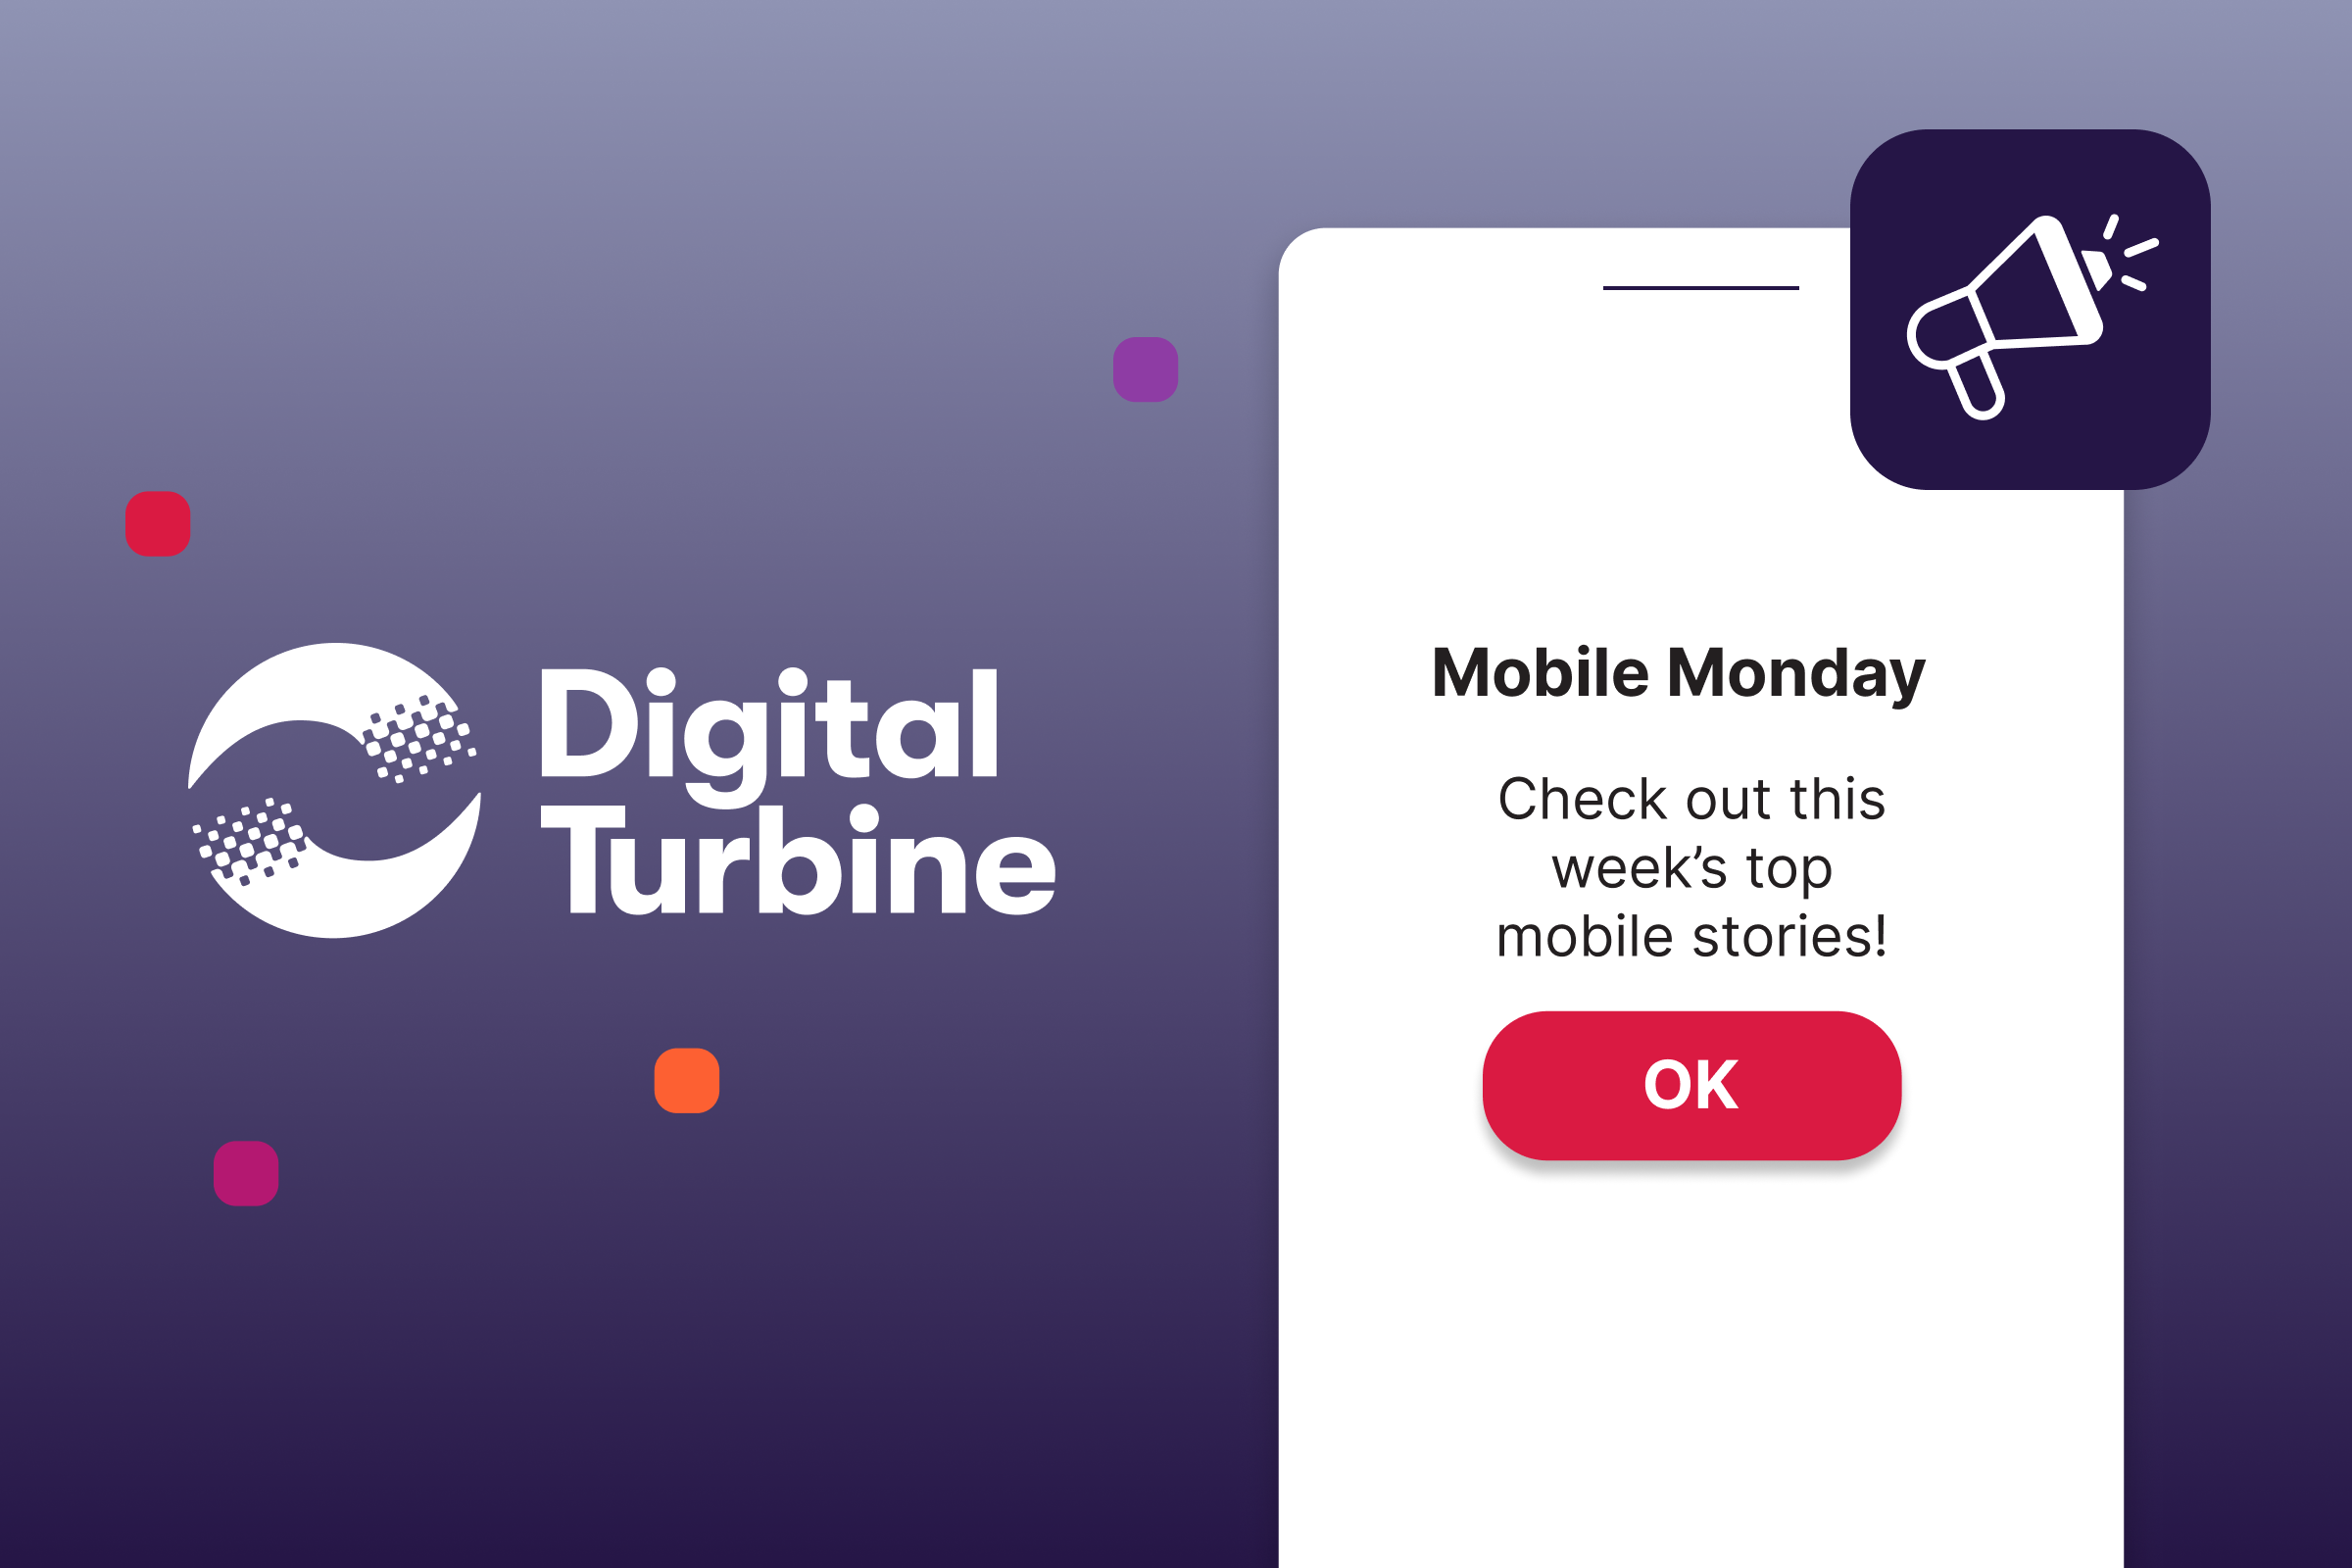 Mobile Monday: Strike Up the Brand!